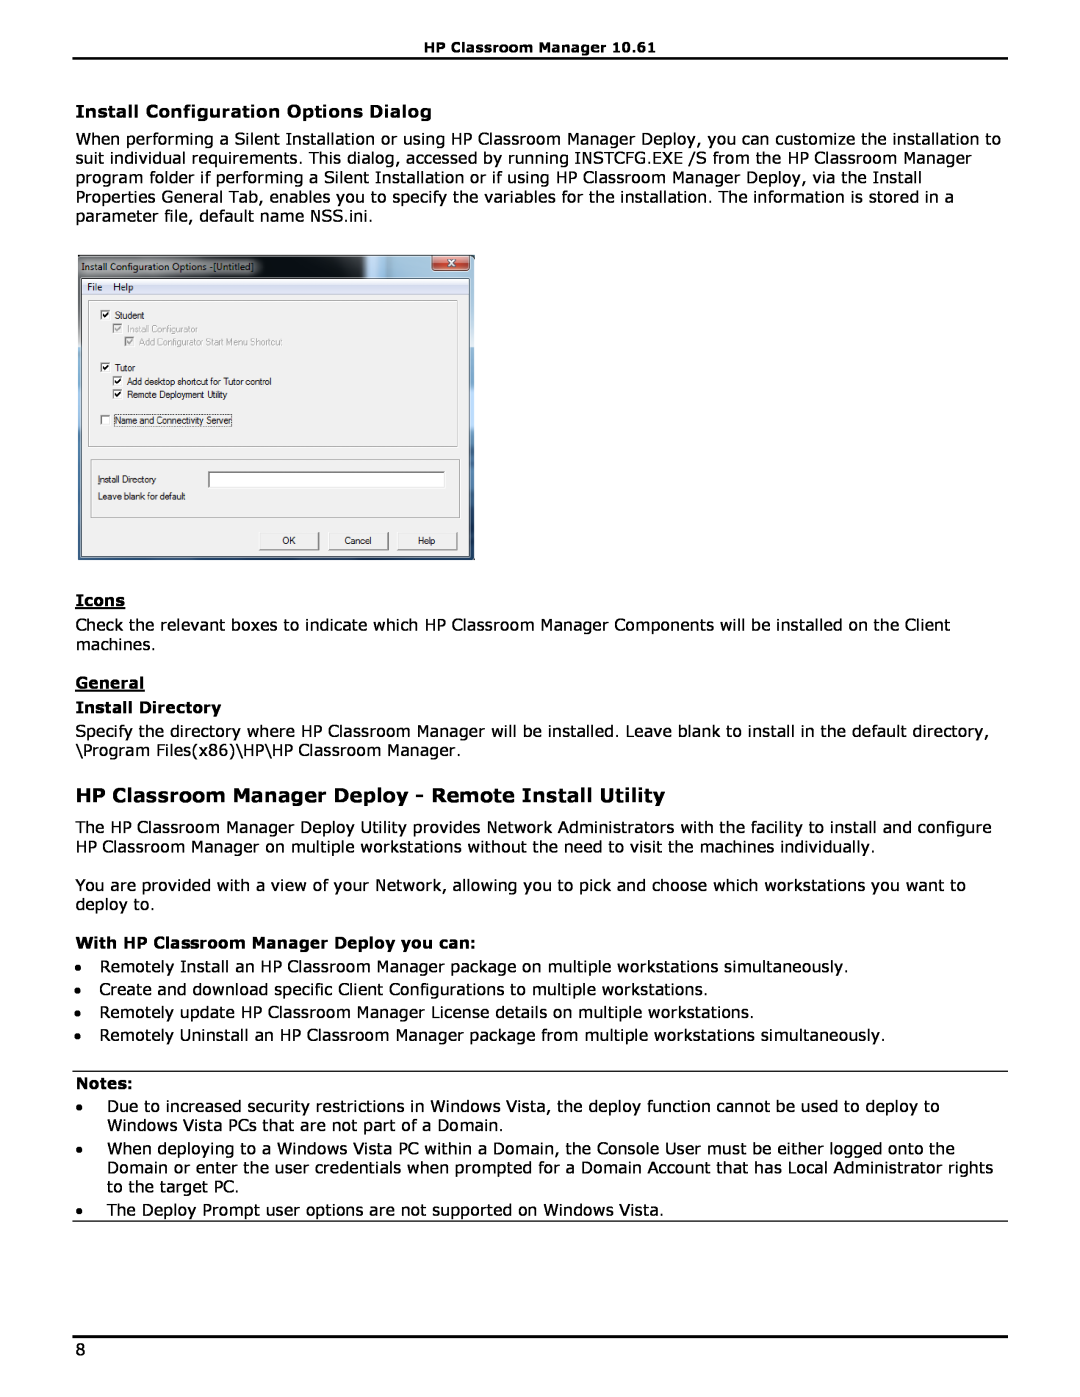 HP manual HP Classroom Manager Deploy - Remote Install Utility, Install Configuration Options Dialog, Icons 